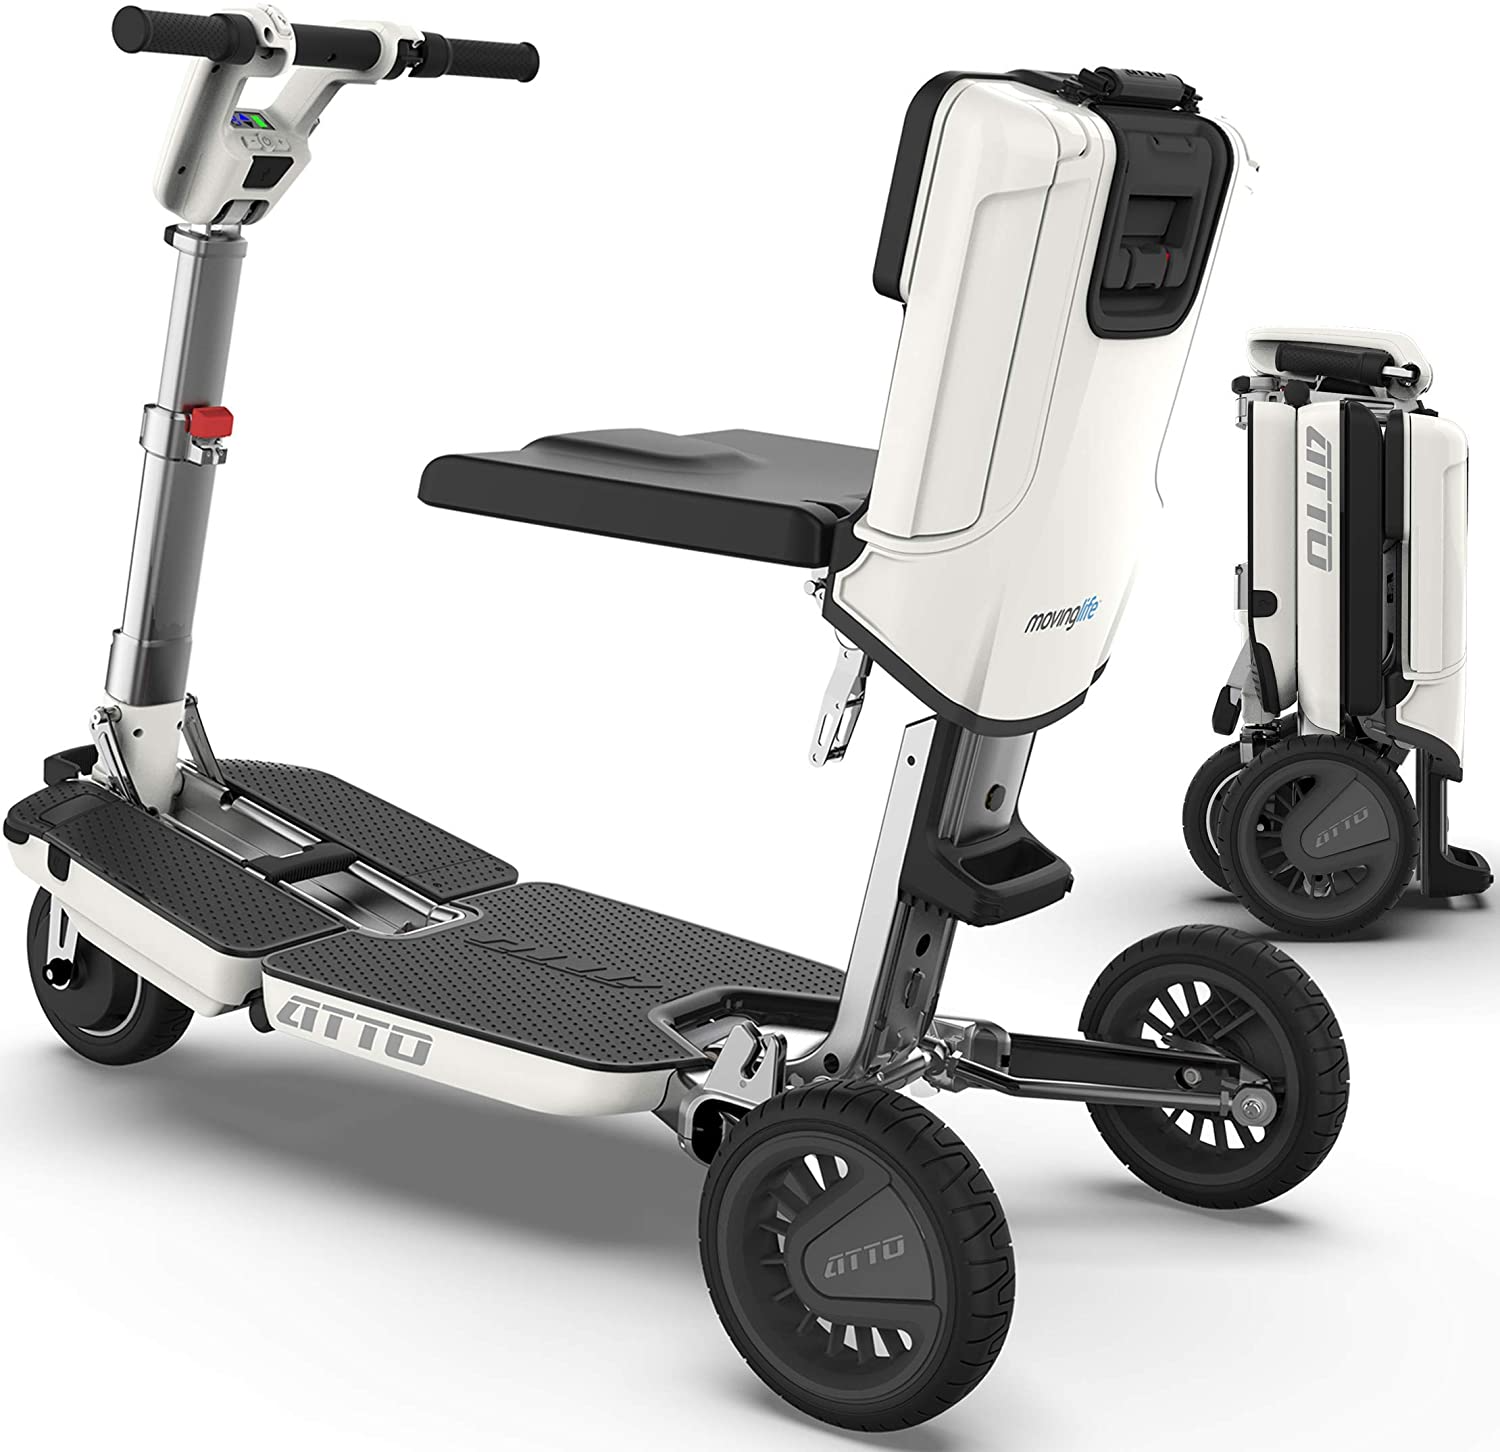 Atto (10 Mph) Best Folding  Scooter For Adults